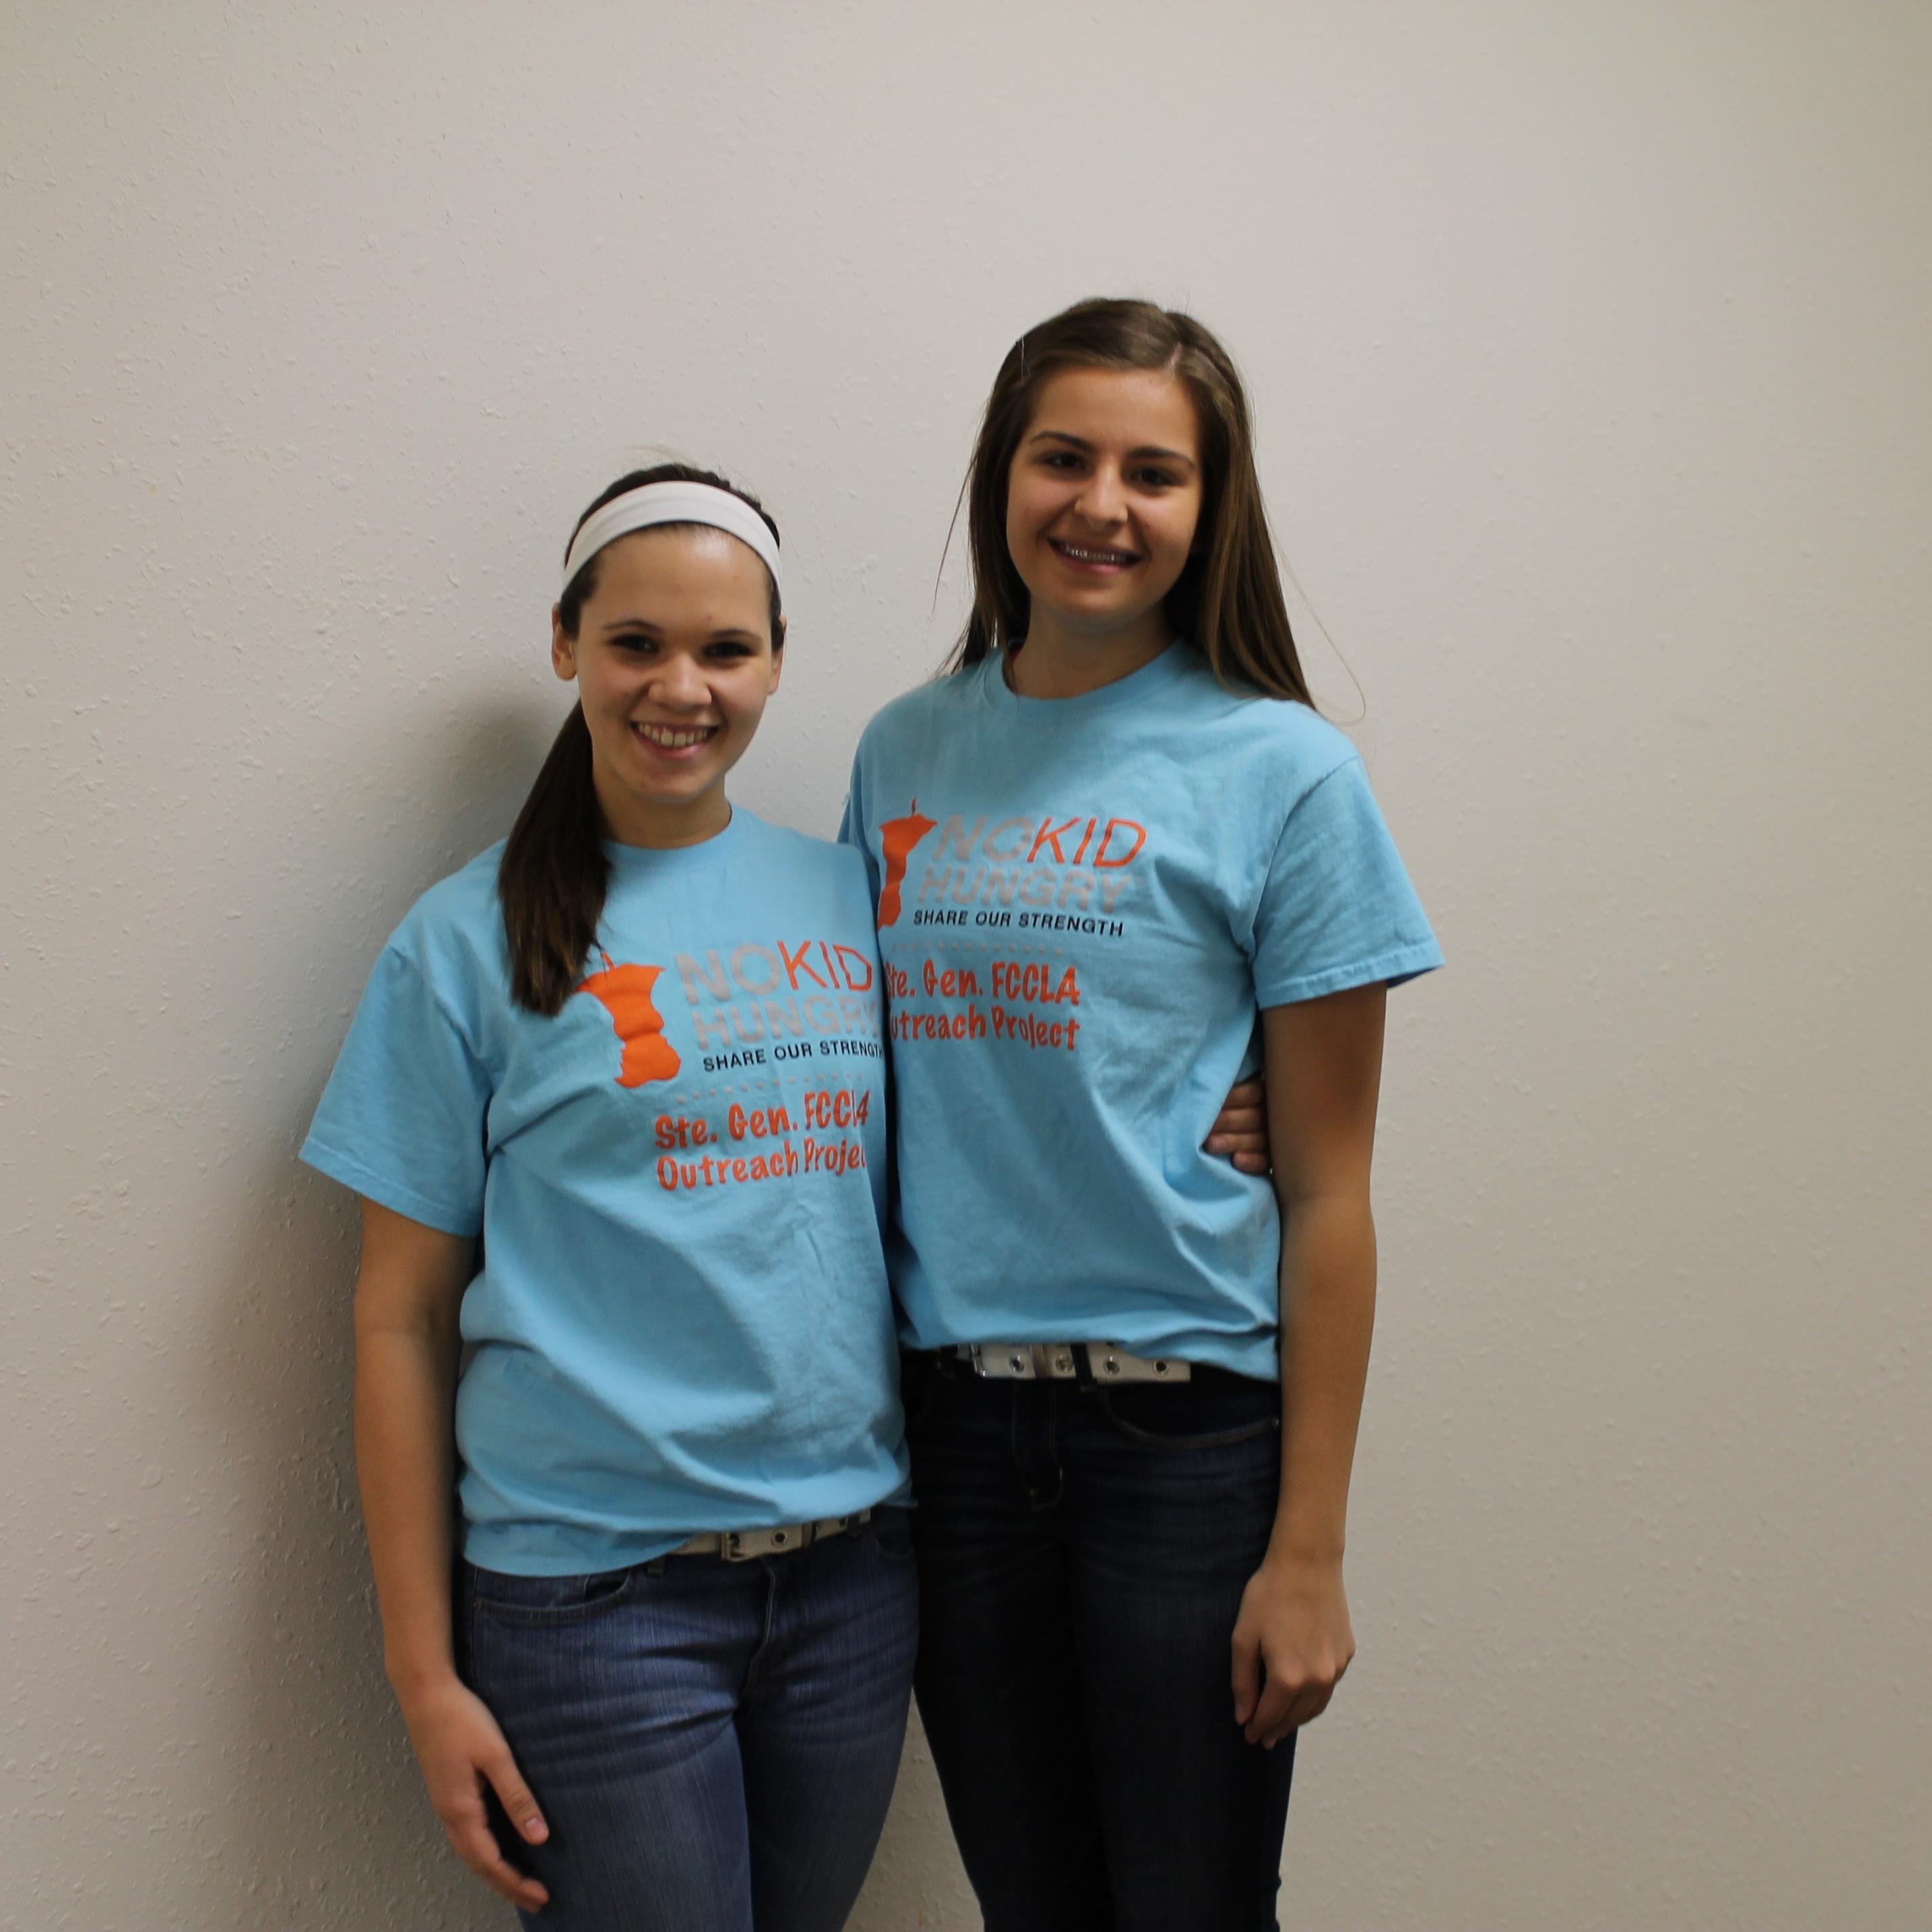 Help us raise awareness of childhood hunger and support No Kid Hungry! Vivian and Addie